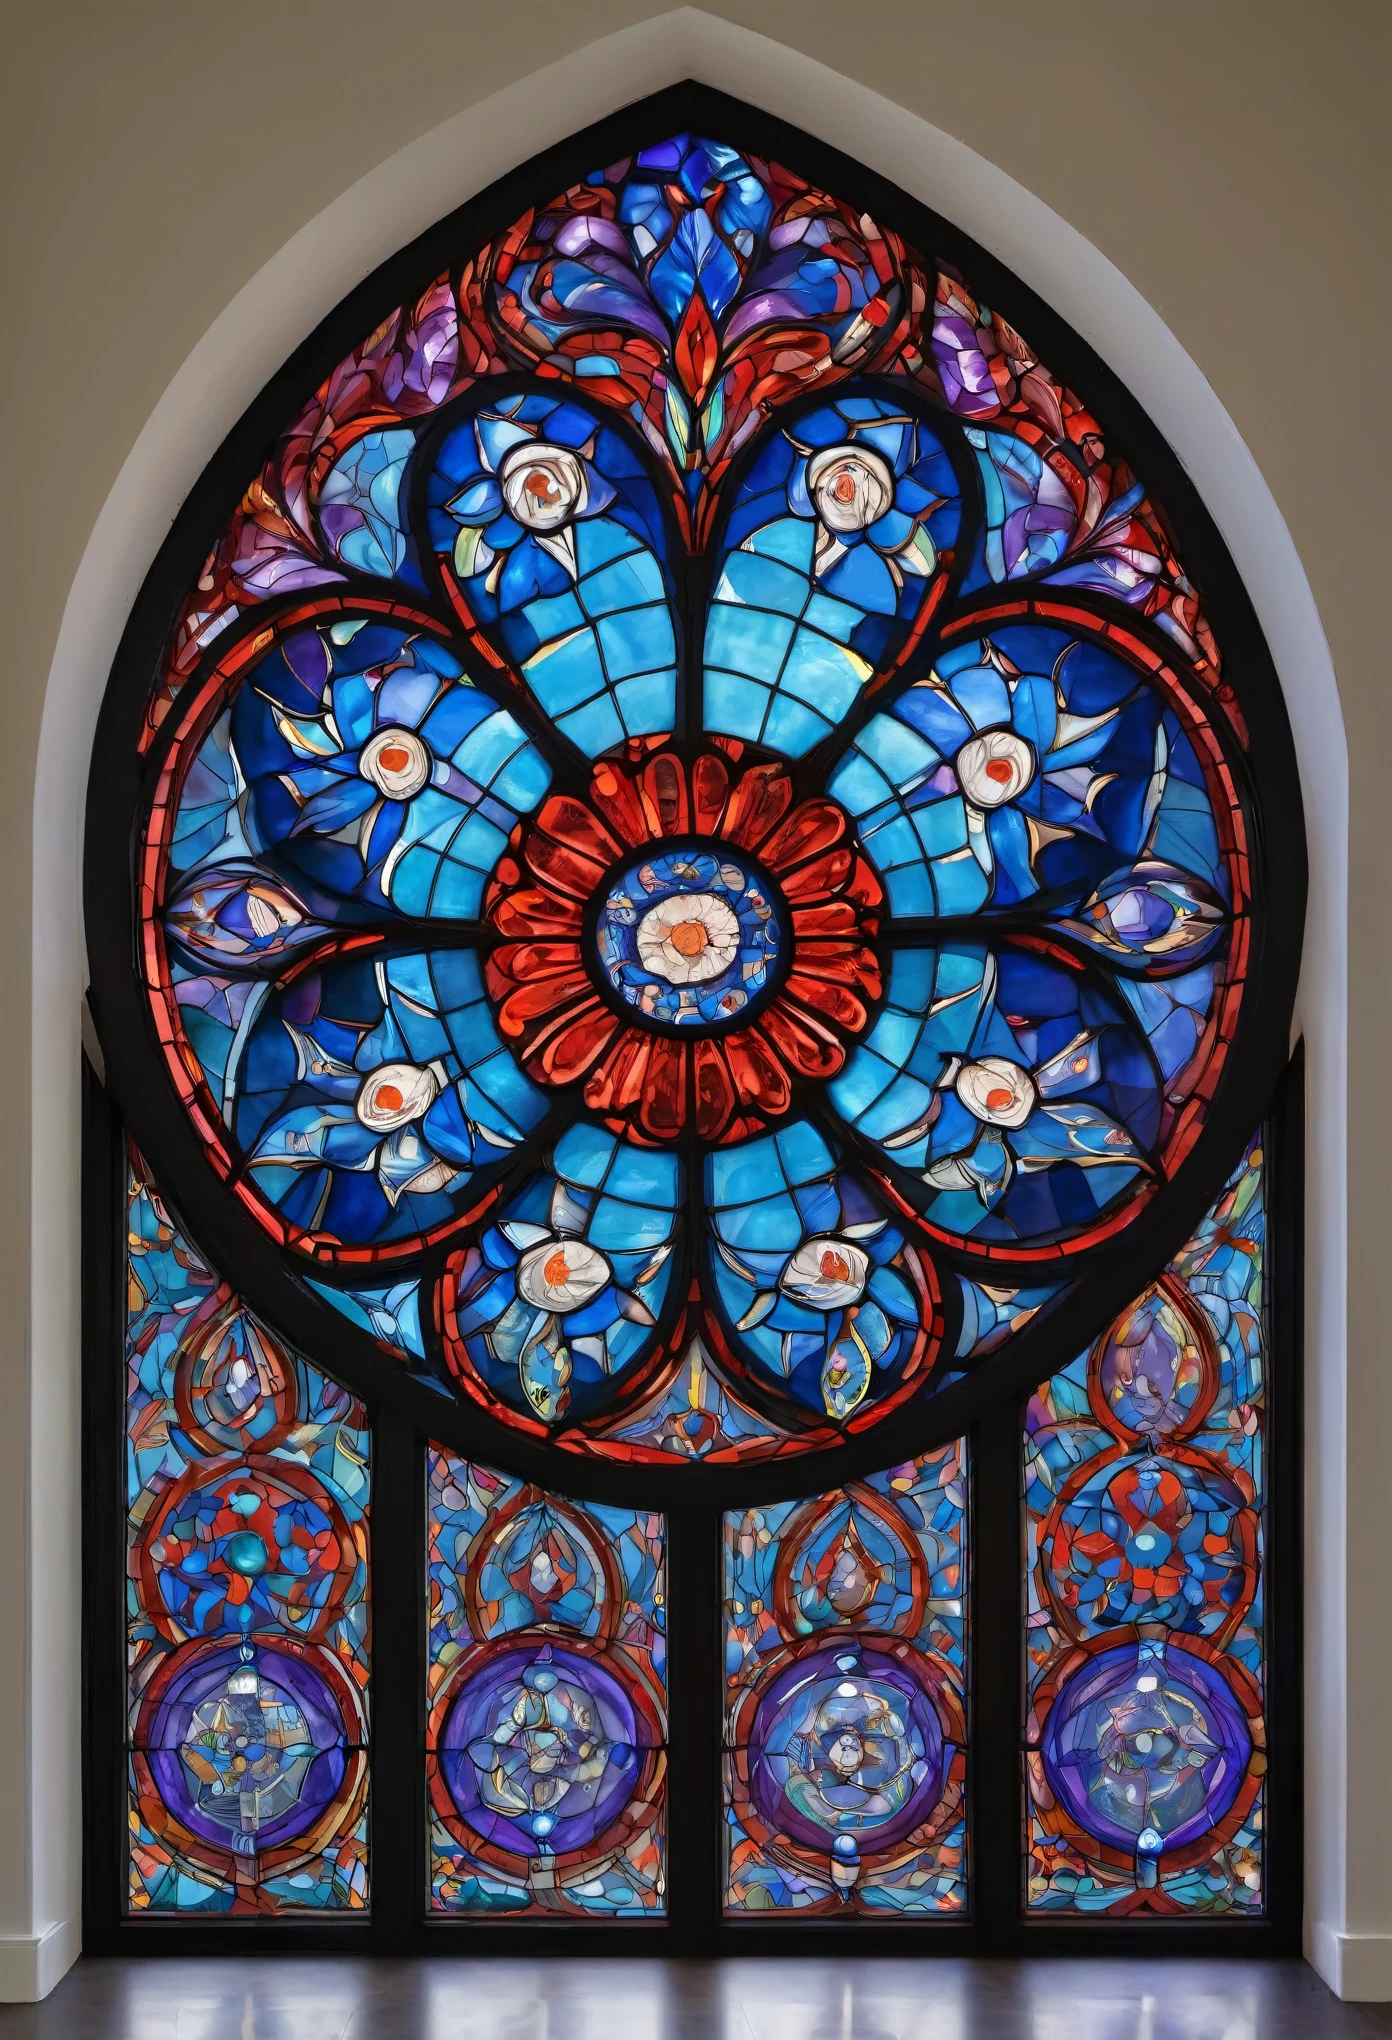 Nun,praying,The image depicts a vibrant and captivating rose window, a circular design that exudes a sense of both elegance and enchantment. Composed primarily of blue, purple, and red hues, the window exudes a sense of warmth and richness, evoking a feeling of deep contentment and peace.The window's circular shape symbolizes wholeness, unity, and infinity, reinforcing its role as a focal point for meditation and reflection. The blues and purples suggest a serene and calm energy, while the reds impart a sense of passion and warmth. The combination of these colors creates a harmonious balance that is both invigorating and soothing.The window is embellished with various small patterns and designs, each one unique and distinctive. These patterns add depth and intricacy to the window's overall appearance, enhancing its visual impact. They are reminiscent of petals, leaves, and other natural elements, connecting the window to the natural world and the cycles of life.The rose window is a traditional element of Gothic architecture, often found in cathedrals and other ecclesiastical buildings. It was designed to capture and redirect natural light in order to create a dazzling effect, enhancing the sacredness of the space. Today, it continues to inspire wonder and reflection among those who gaze upon it,completing the stable diffusion of serenity and contentment,masterpiece, best